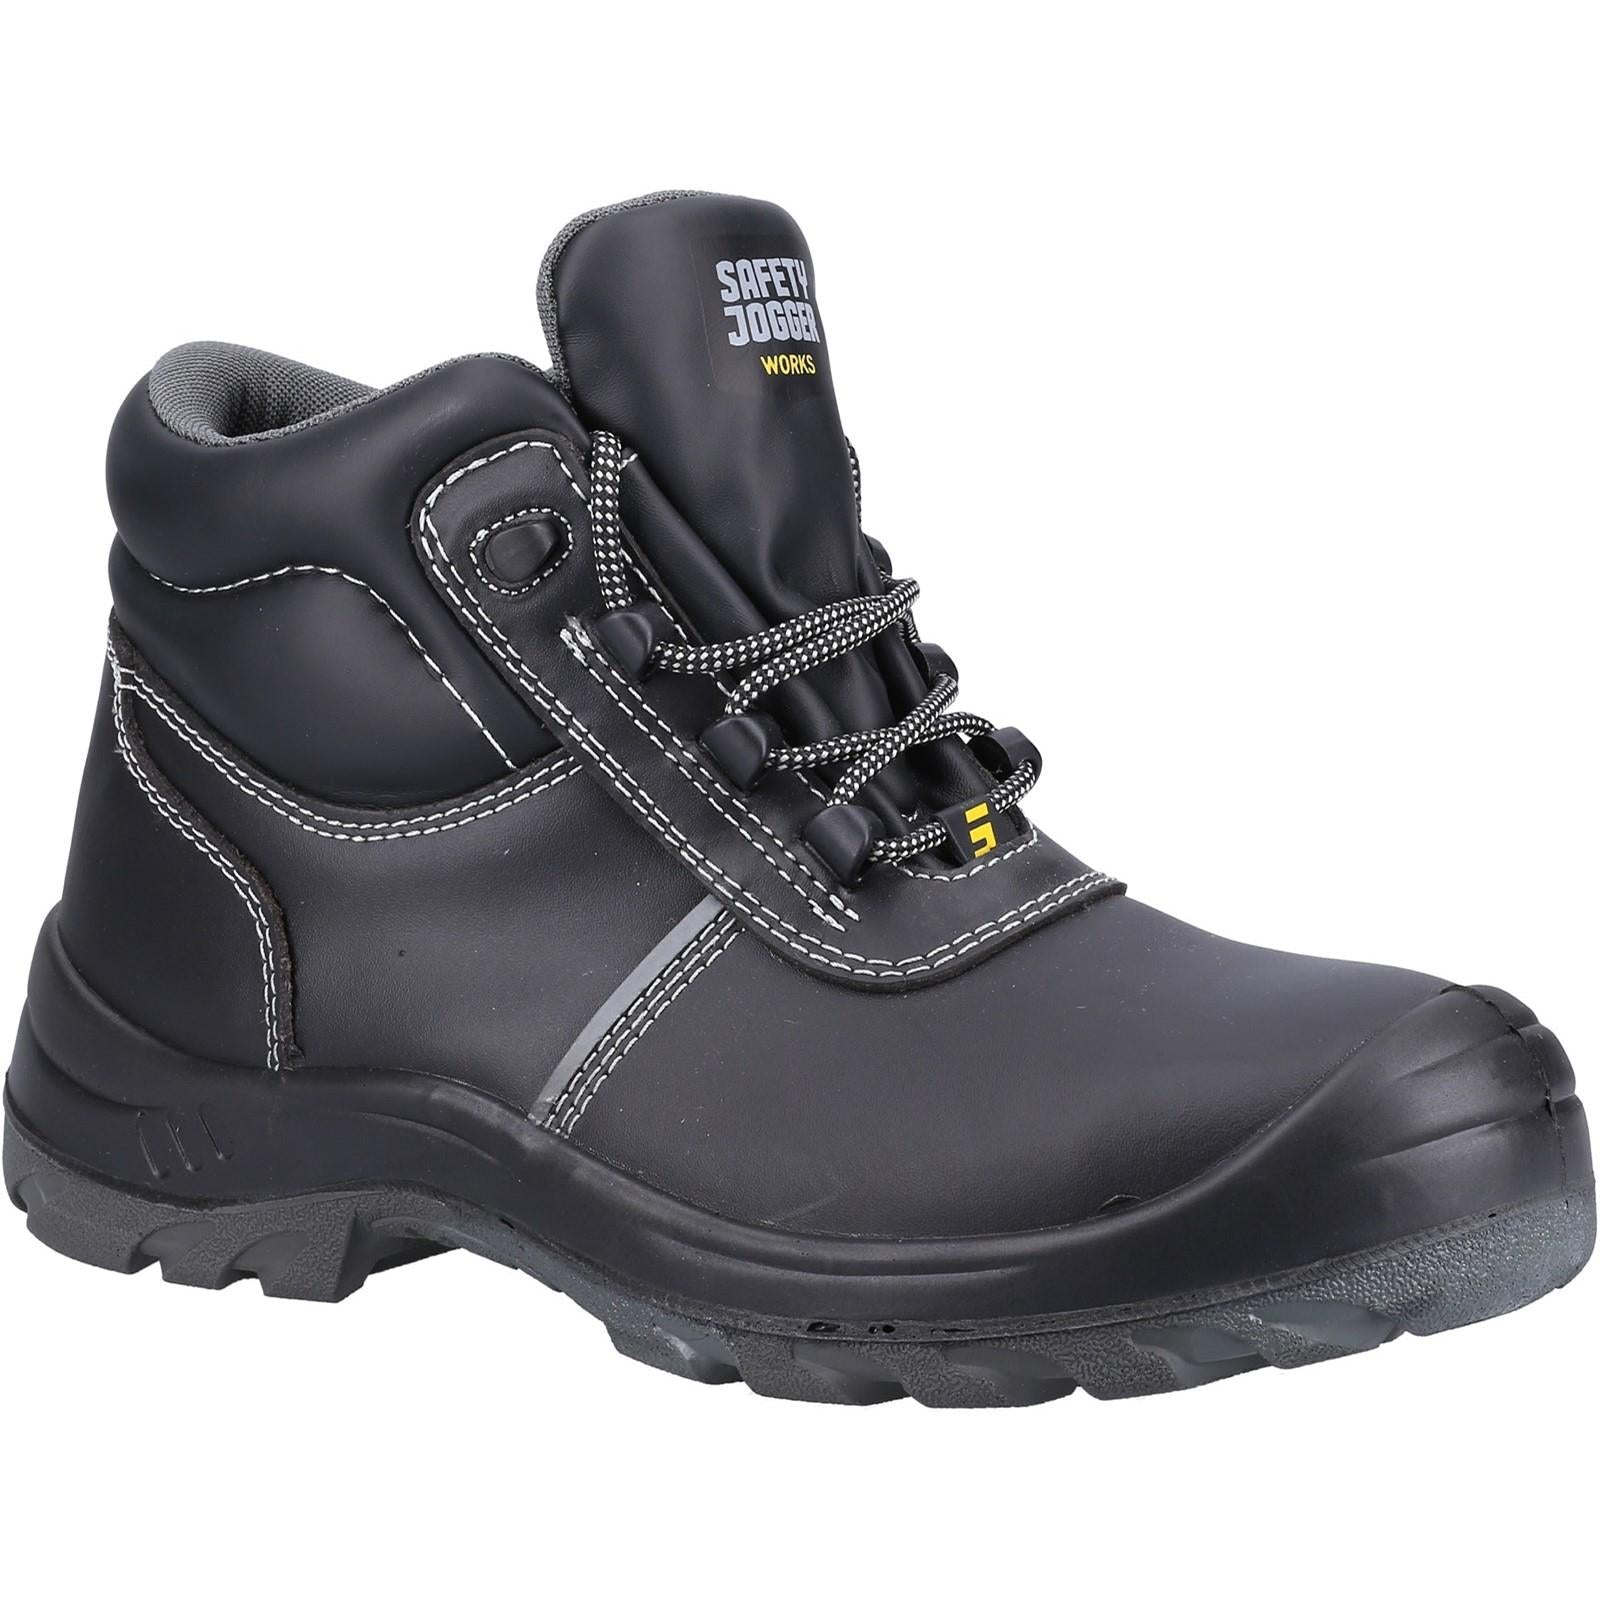 Safety Jogger EOS S3 black water resistant composite toe/midsole safety boots